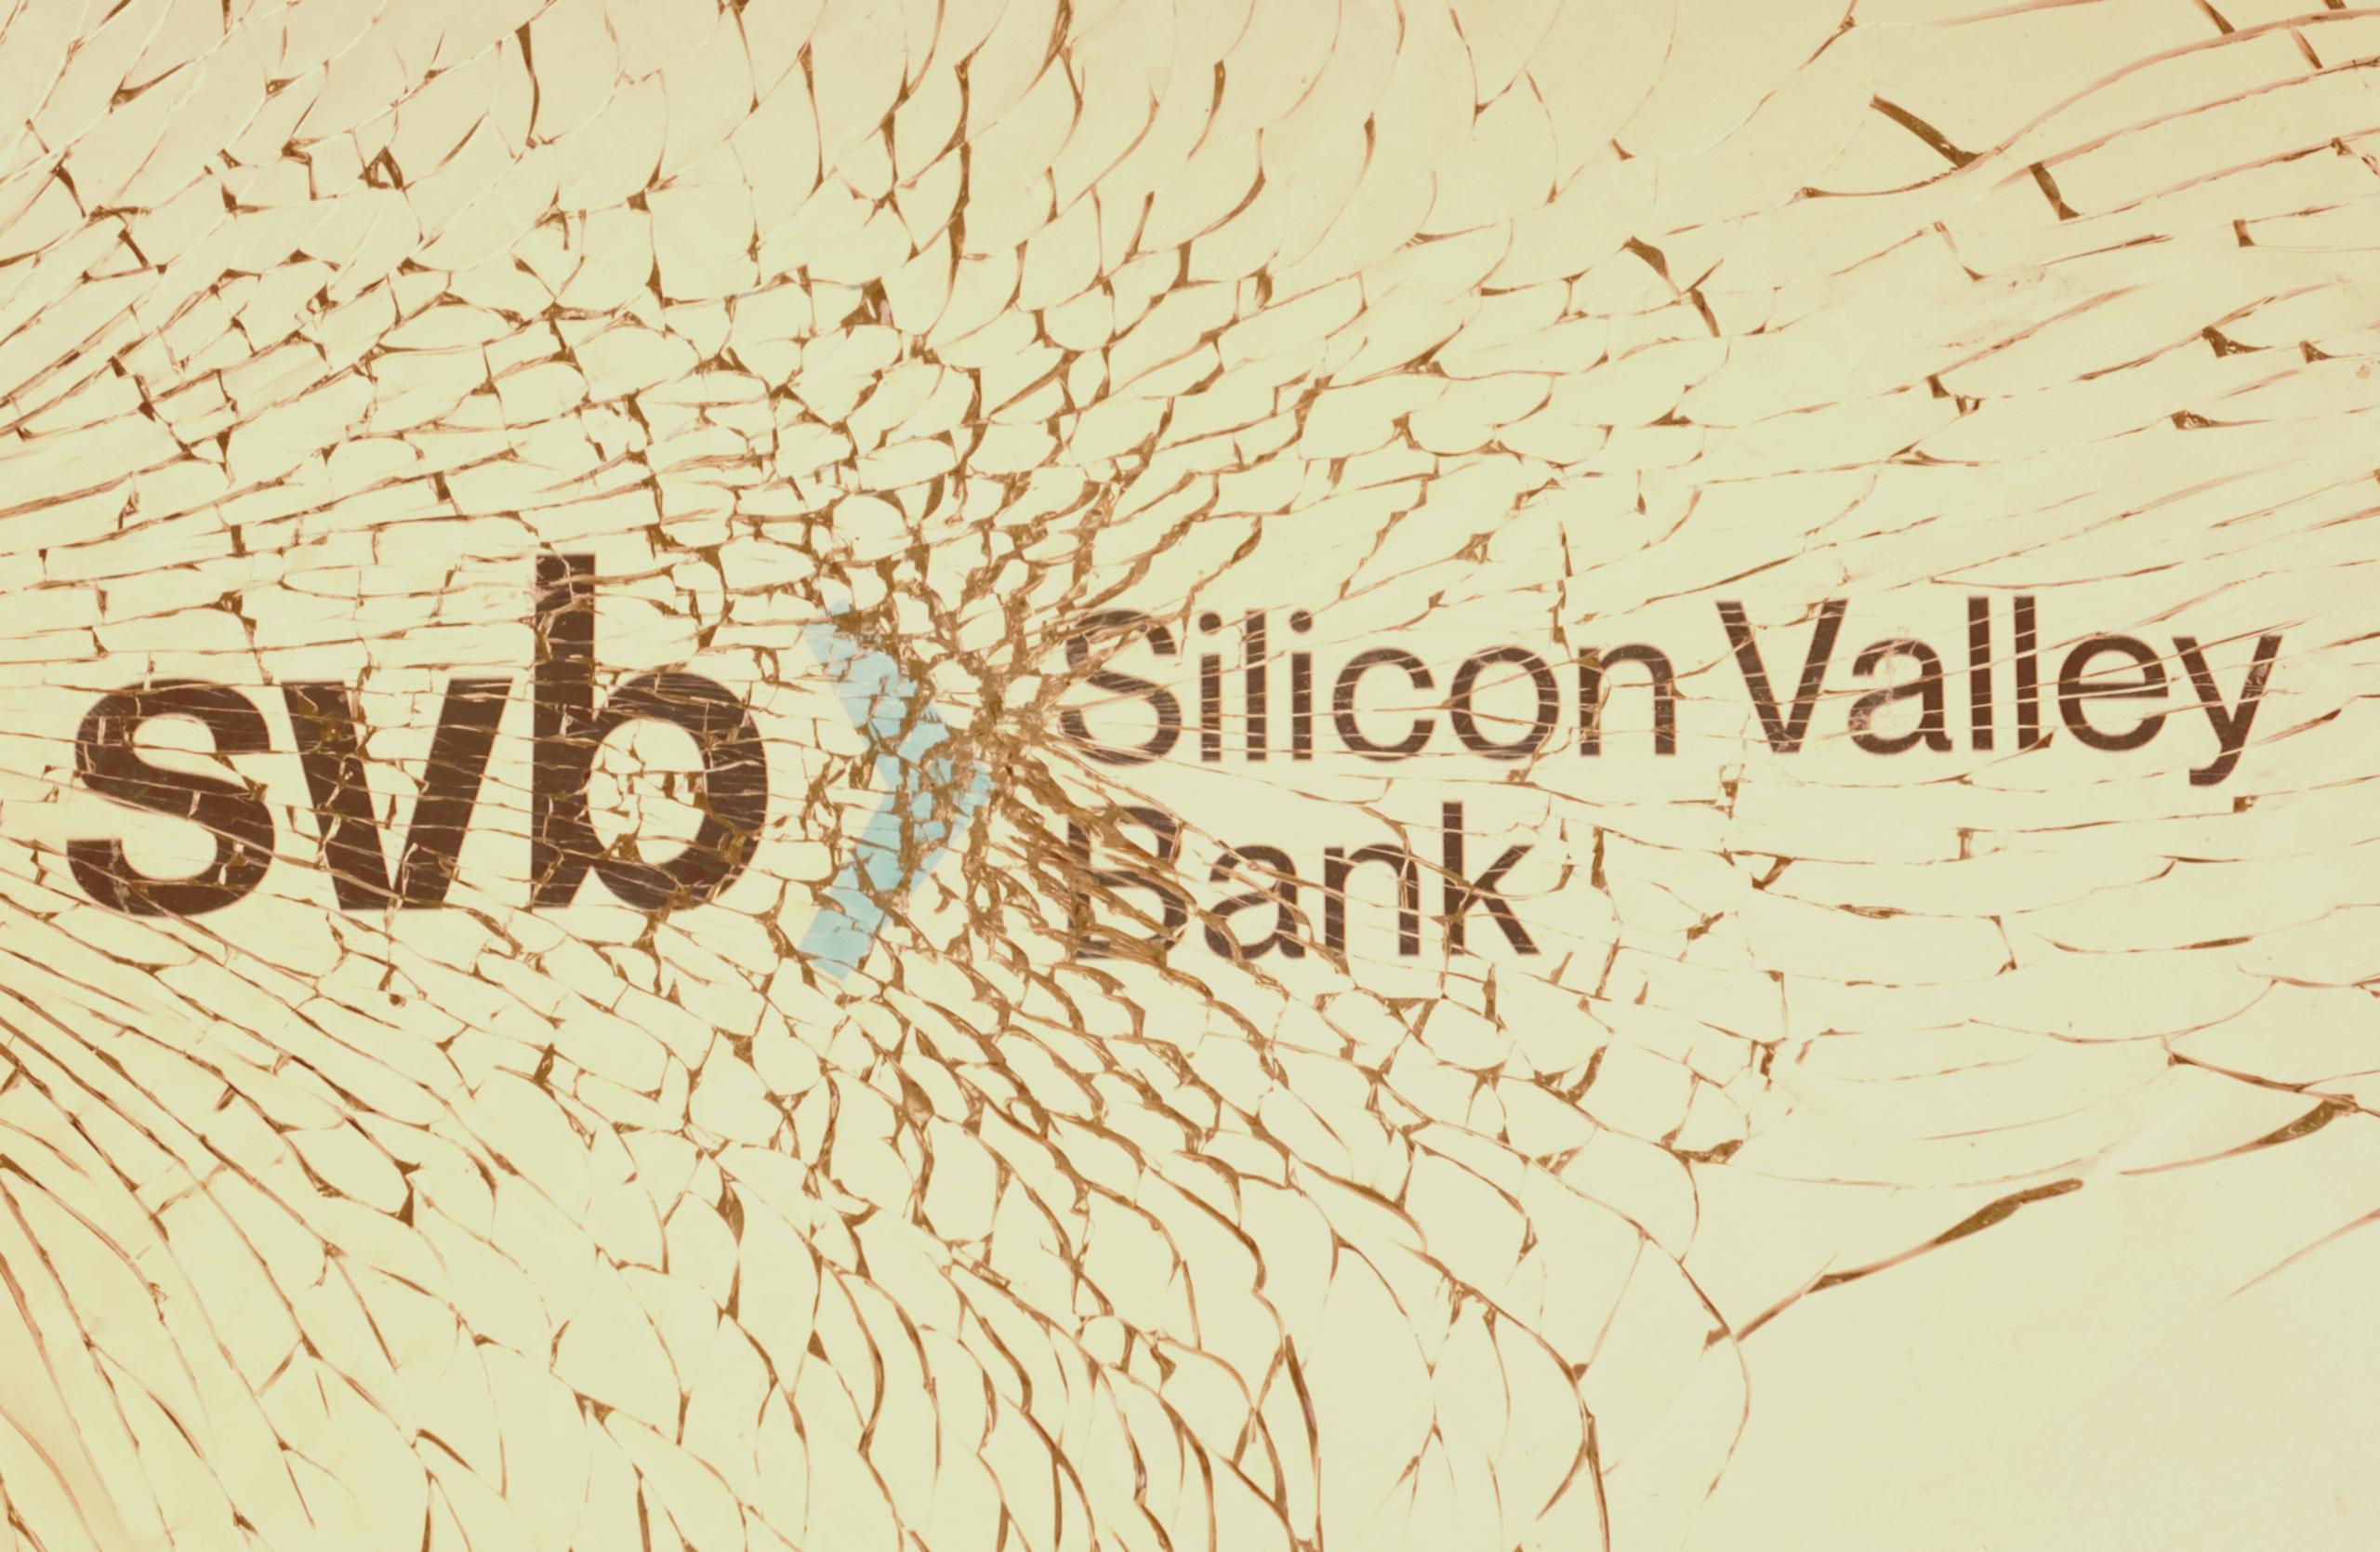 Lessons from Silicon Valley Bank’s demise